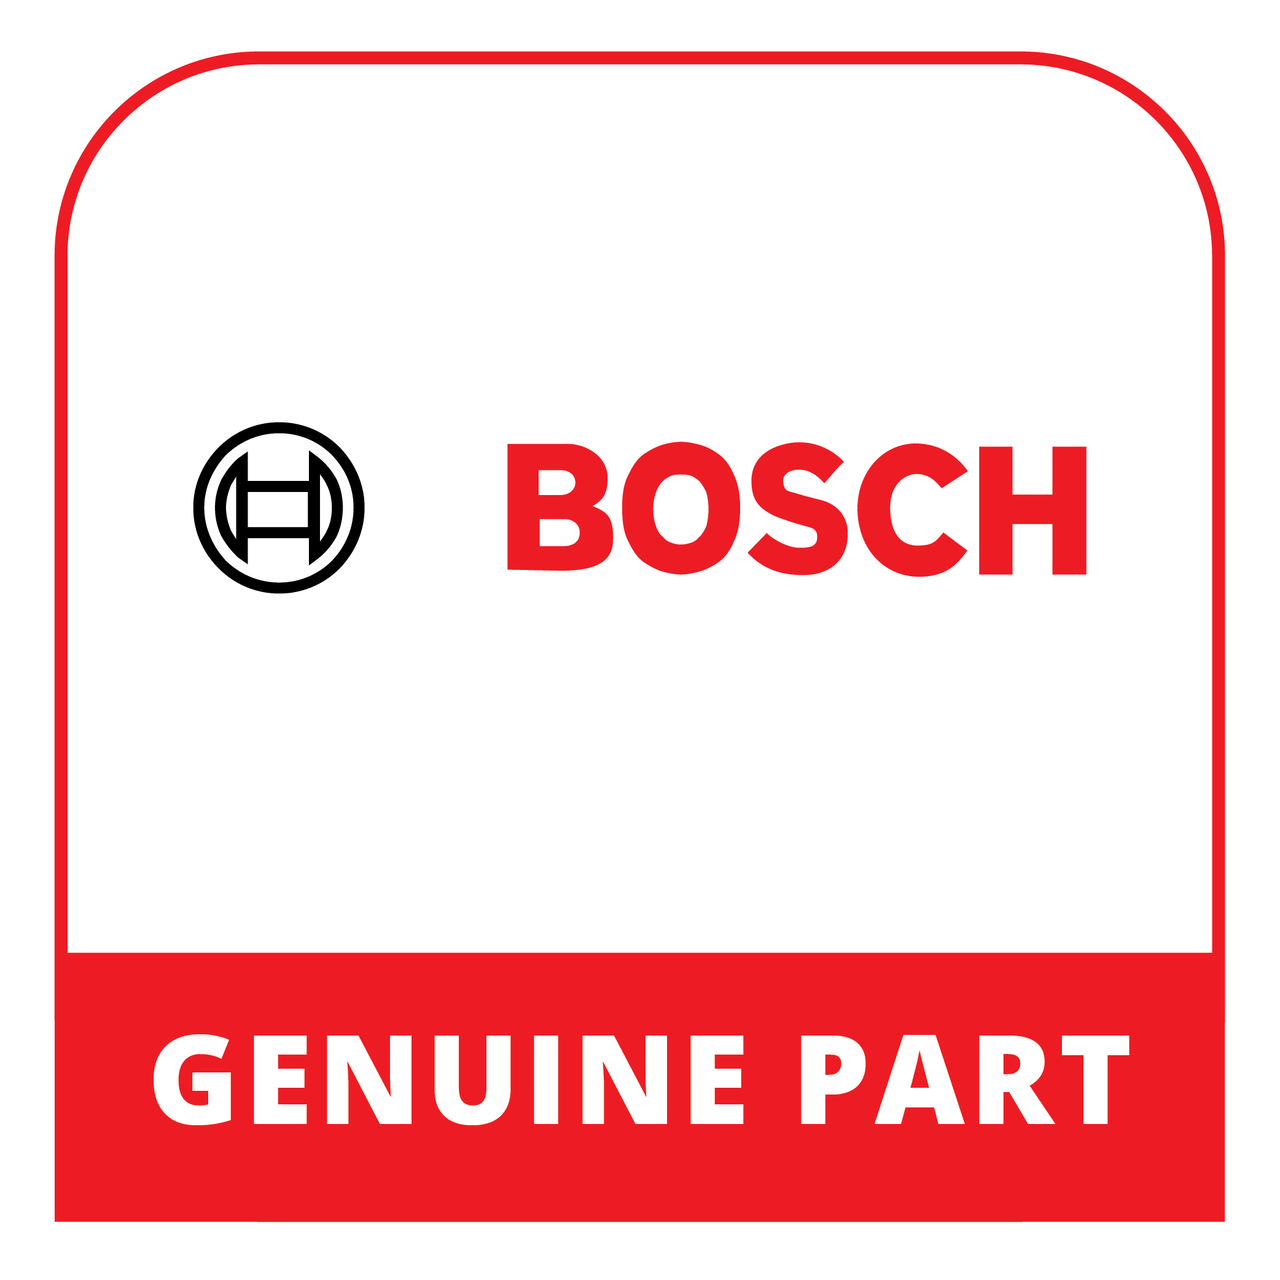 Bosch (Thermador) 18082079 - Instruction Manual - Genuine Bosch (Thermador) Part